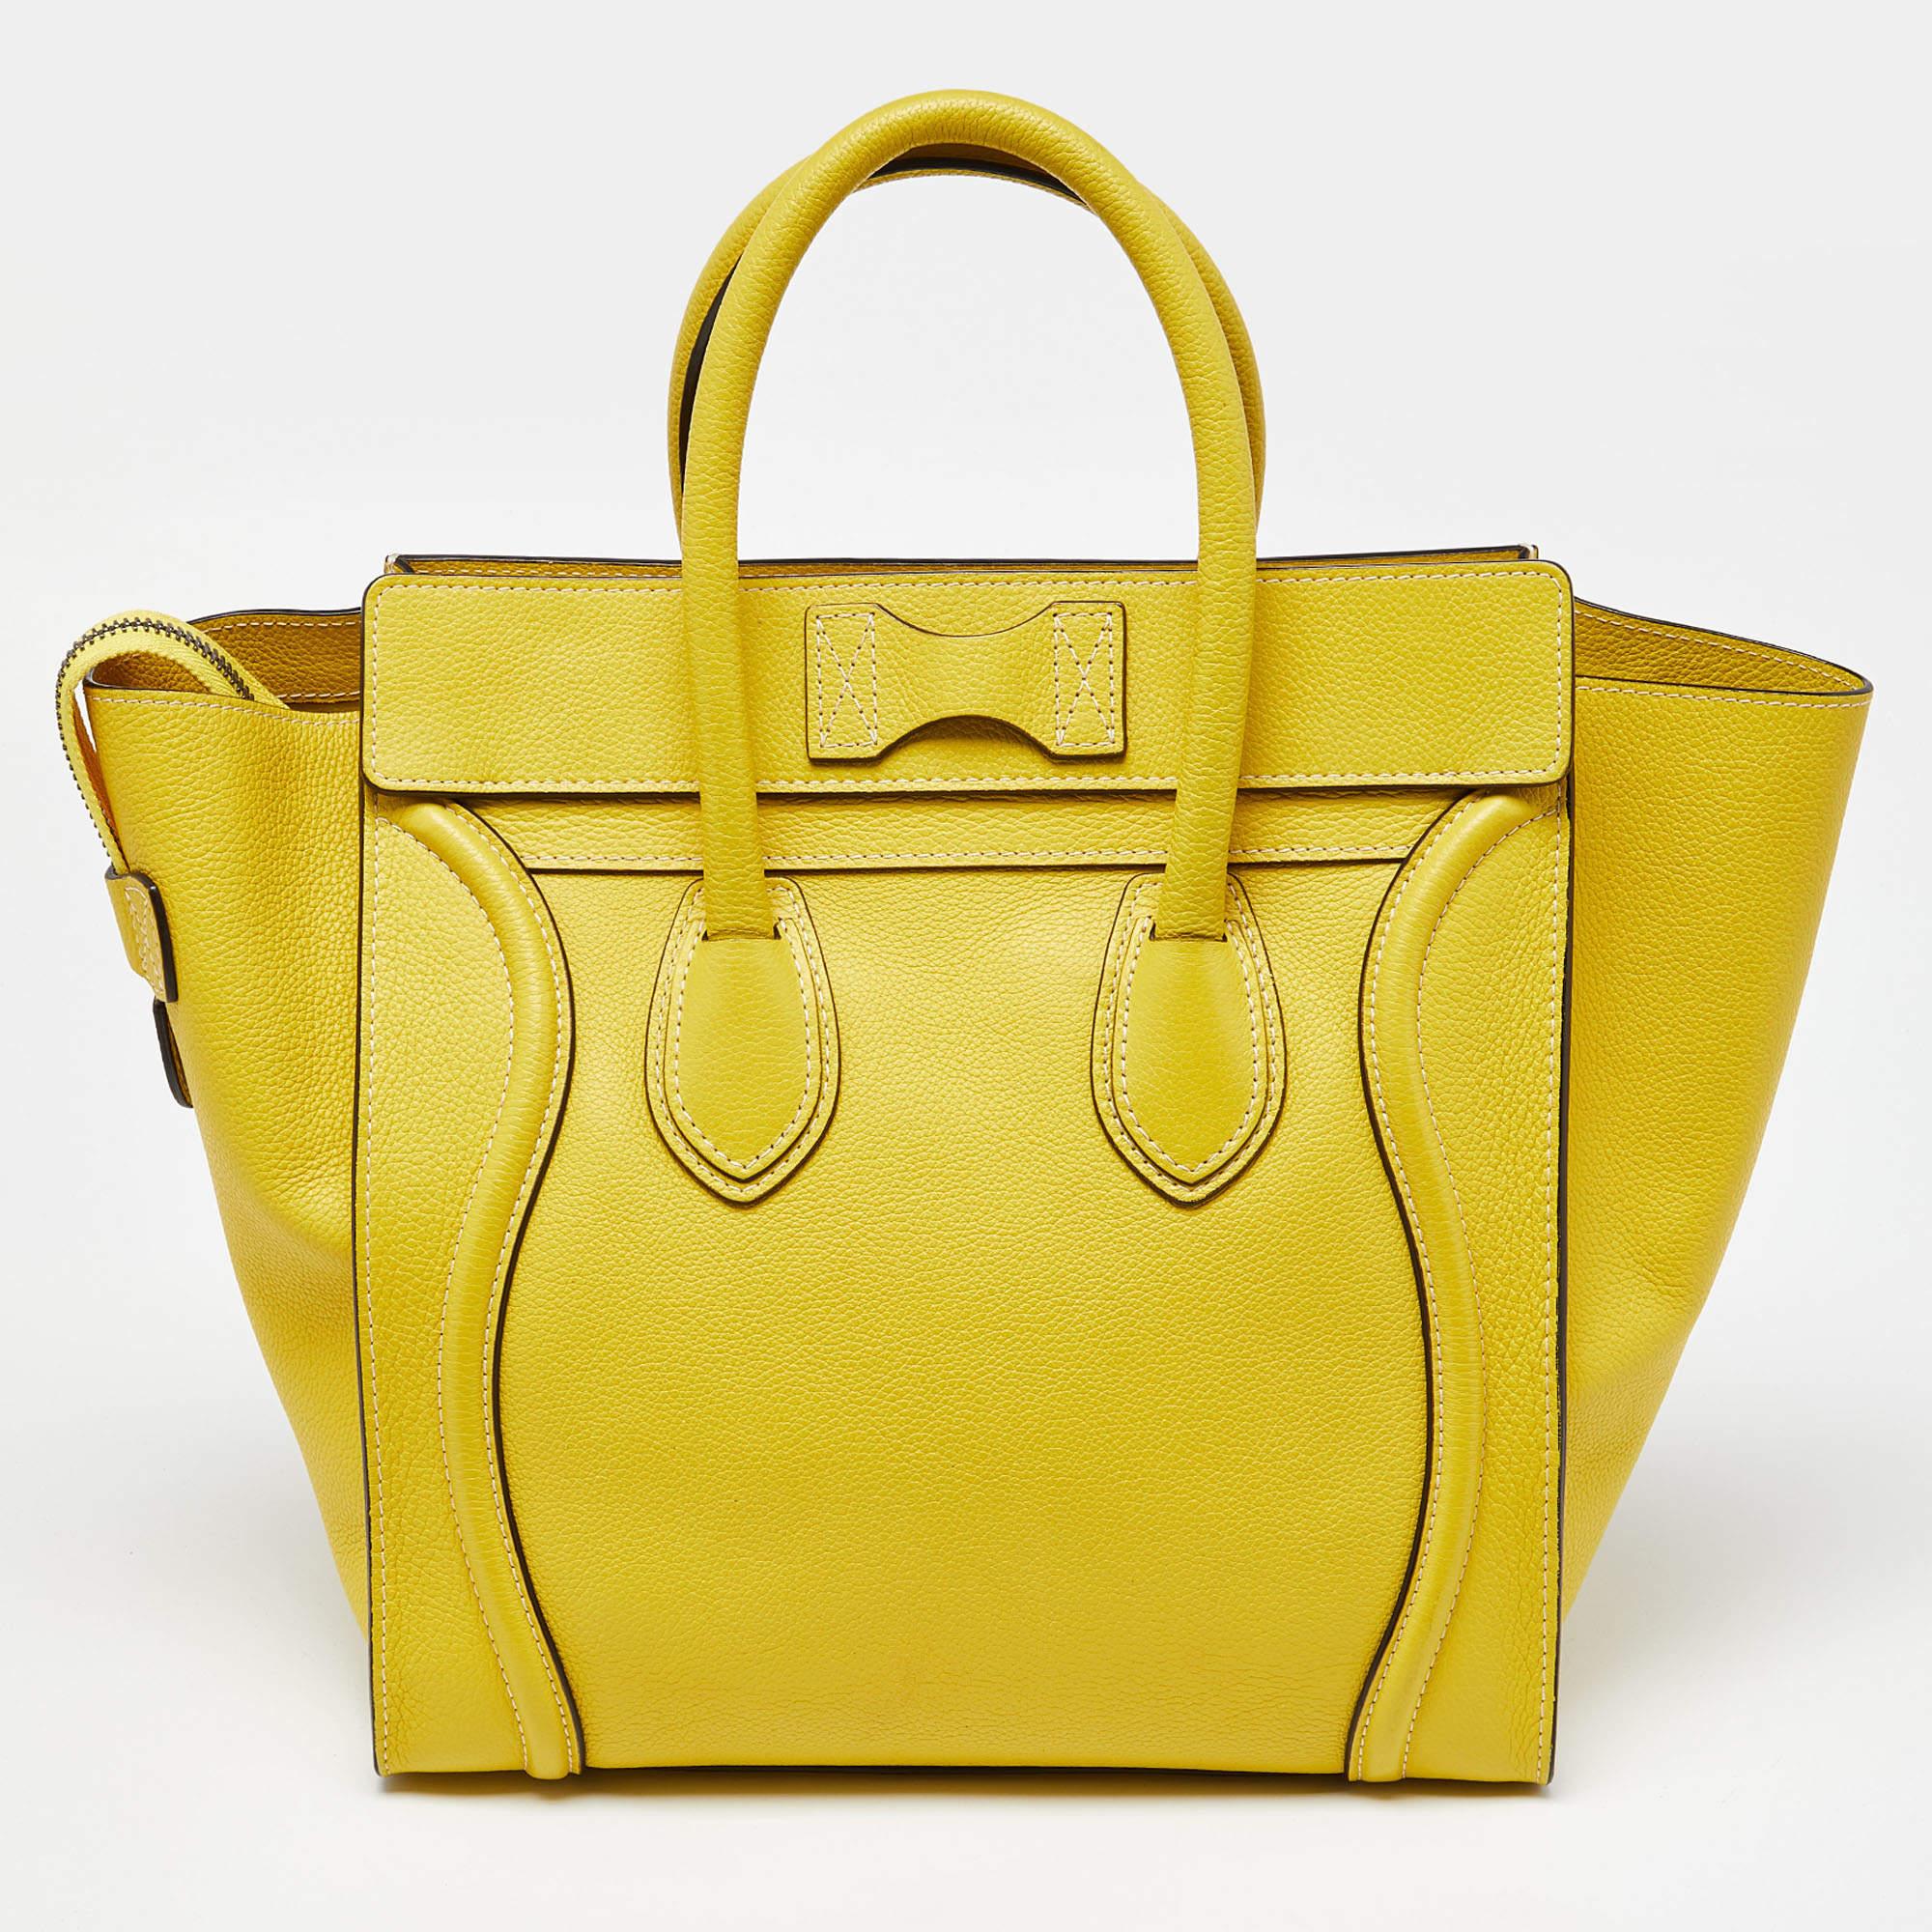 The Céline Luggage tote is a luxurious fashion accessory, featuring a blend of high-quality leather. This compact yet stylish tote showcases a yellow design and is adorned with the discreet Céline logo. It boasts a spacious interior, making it both